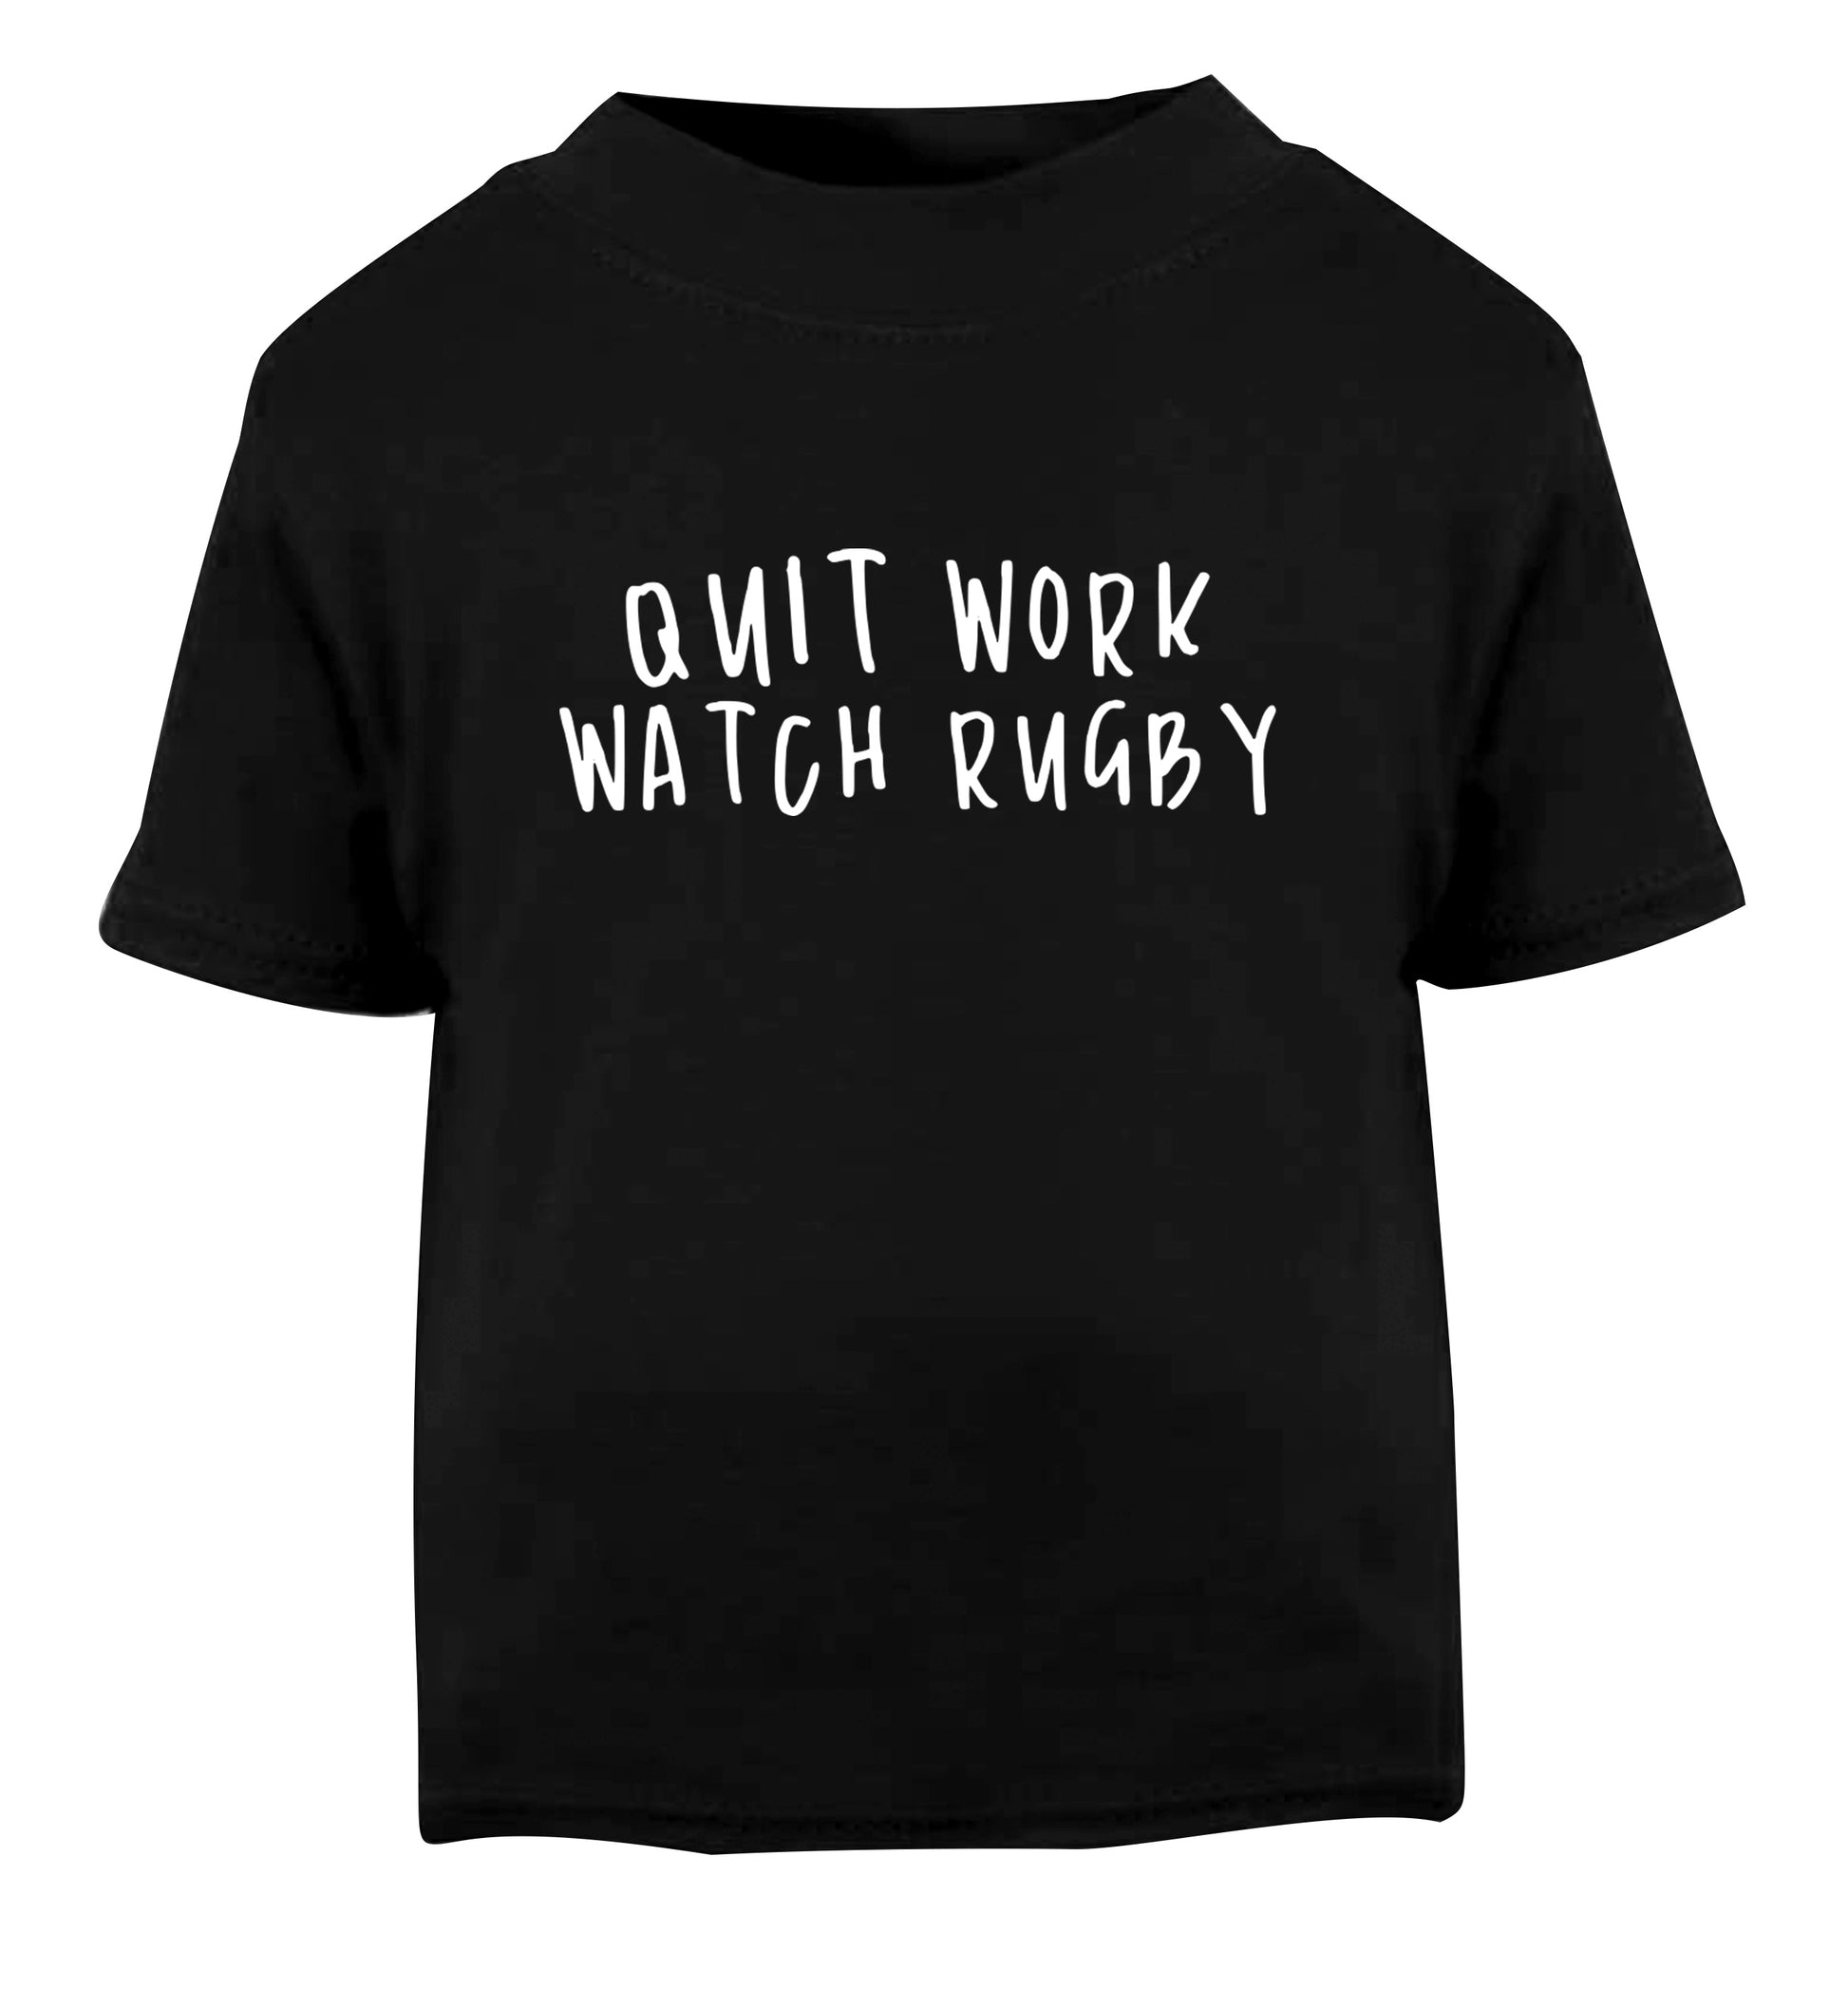 Quit work watch rugby Black Baby Toddler Tshirt 2 years